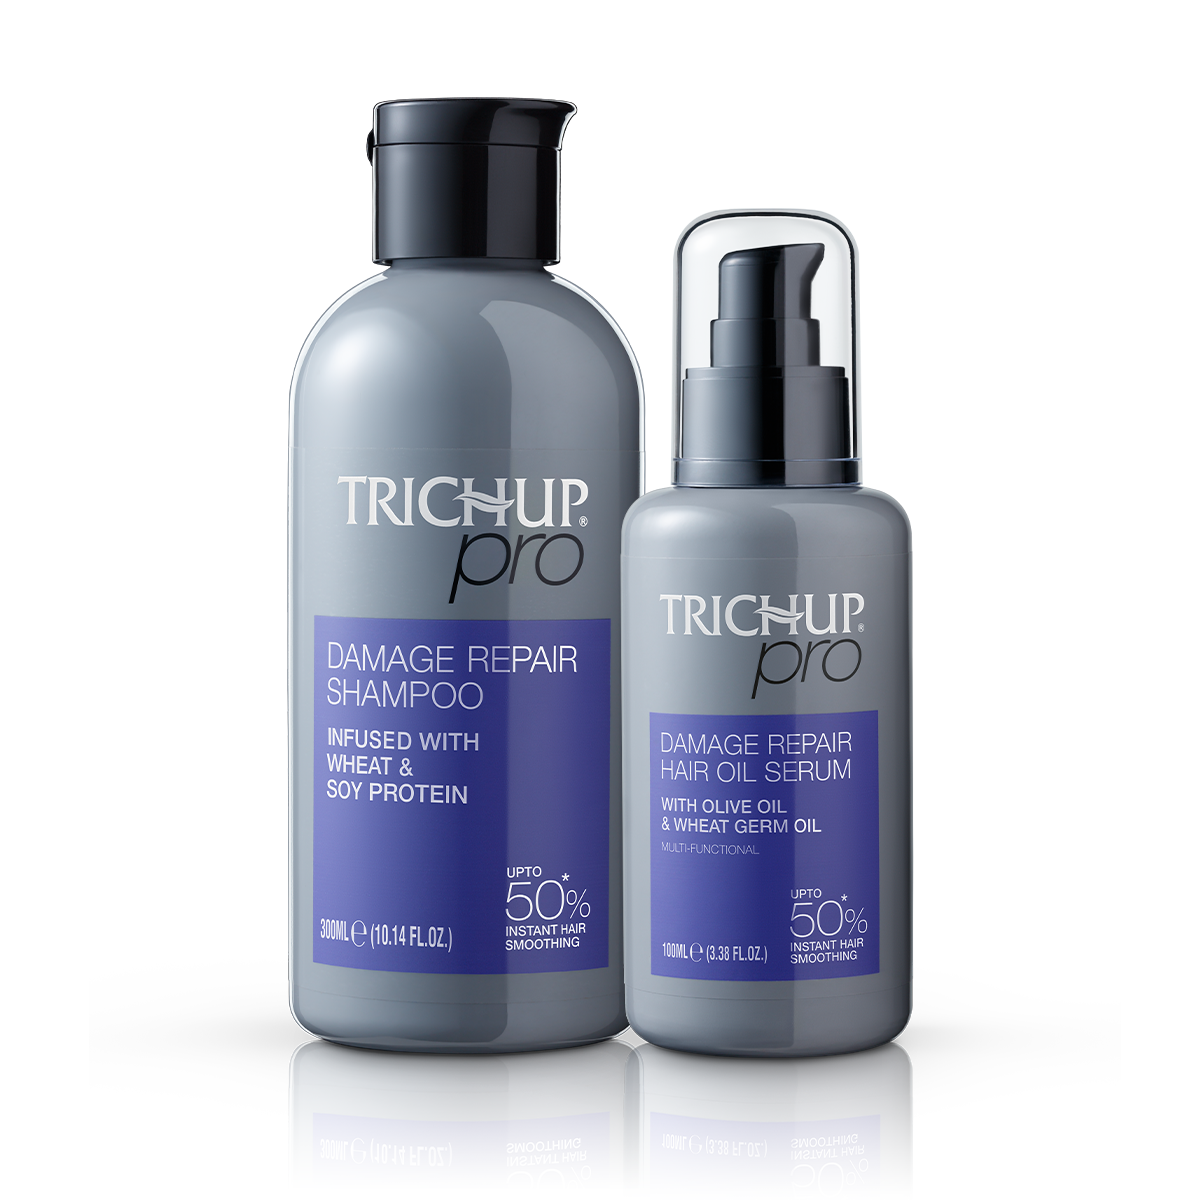 Trichup Pro Damage Repair & Instant Smoothing Hair Care Combo for Dry Frizzy Hair (Set of 2) - Shampoo 300 ml + Hair Oil Serum 100 ml | Improves Texture, Manageability | Control Breakage | Nourishment